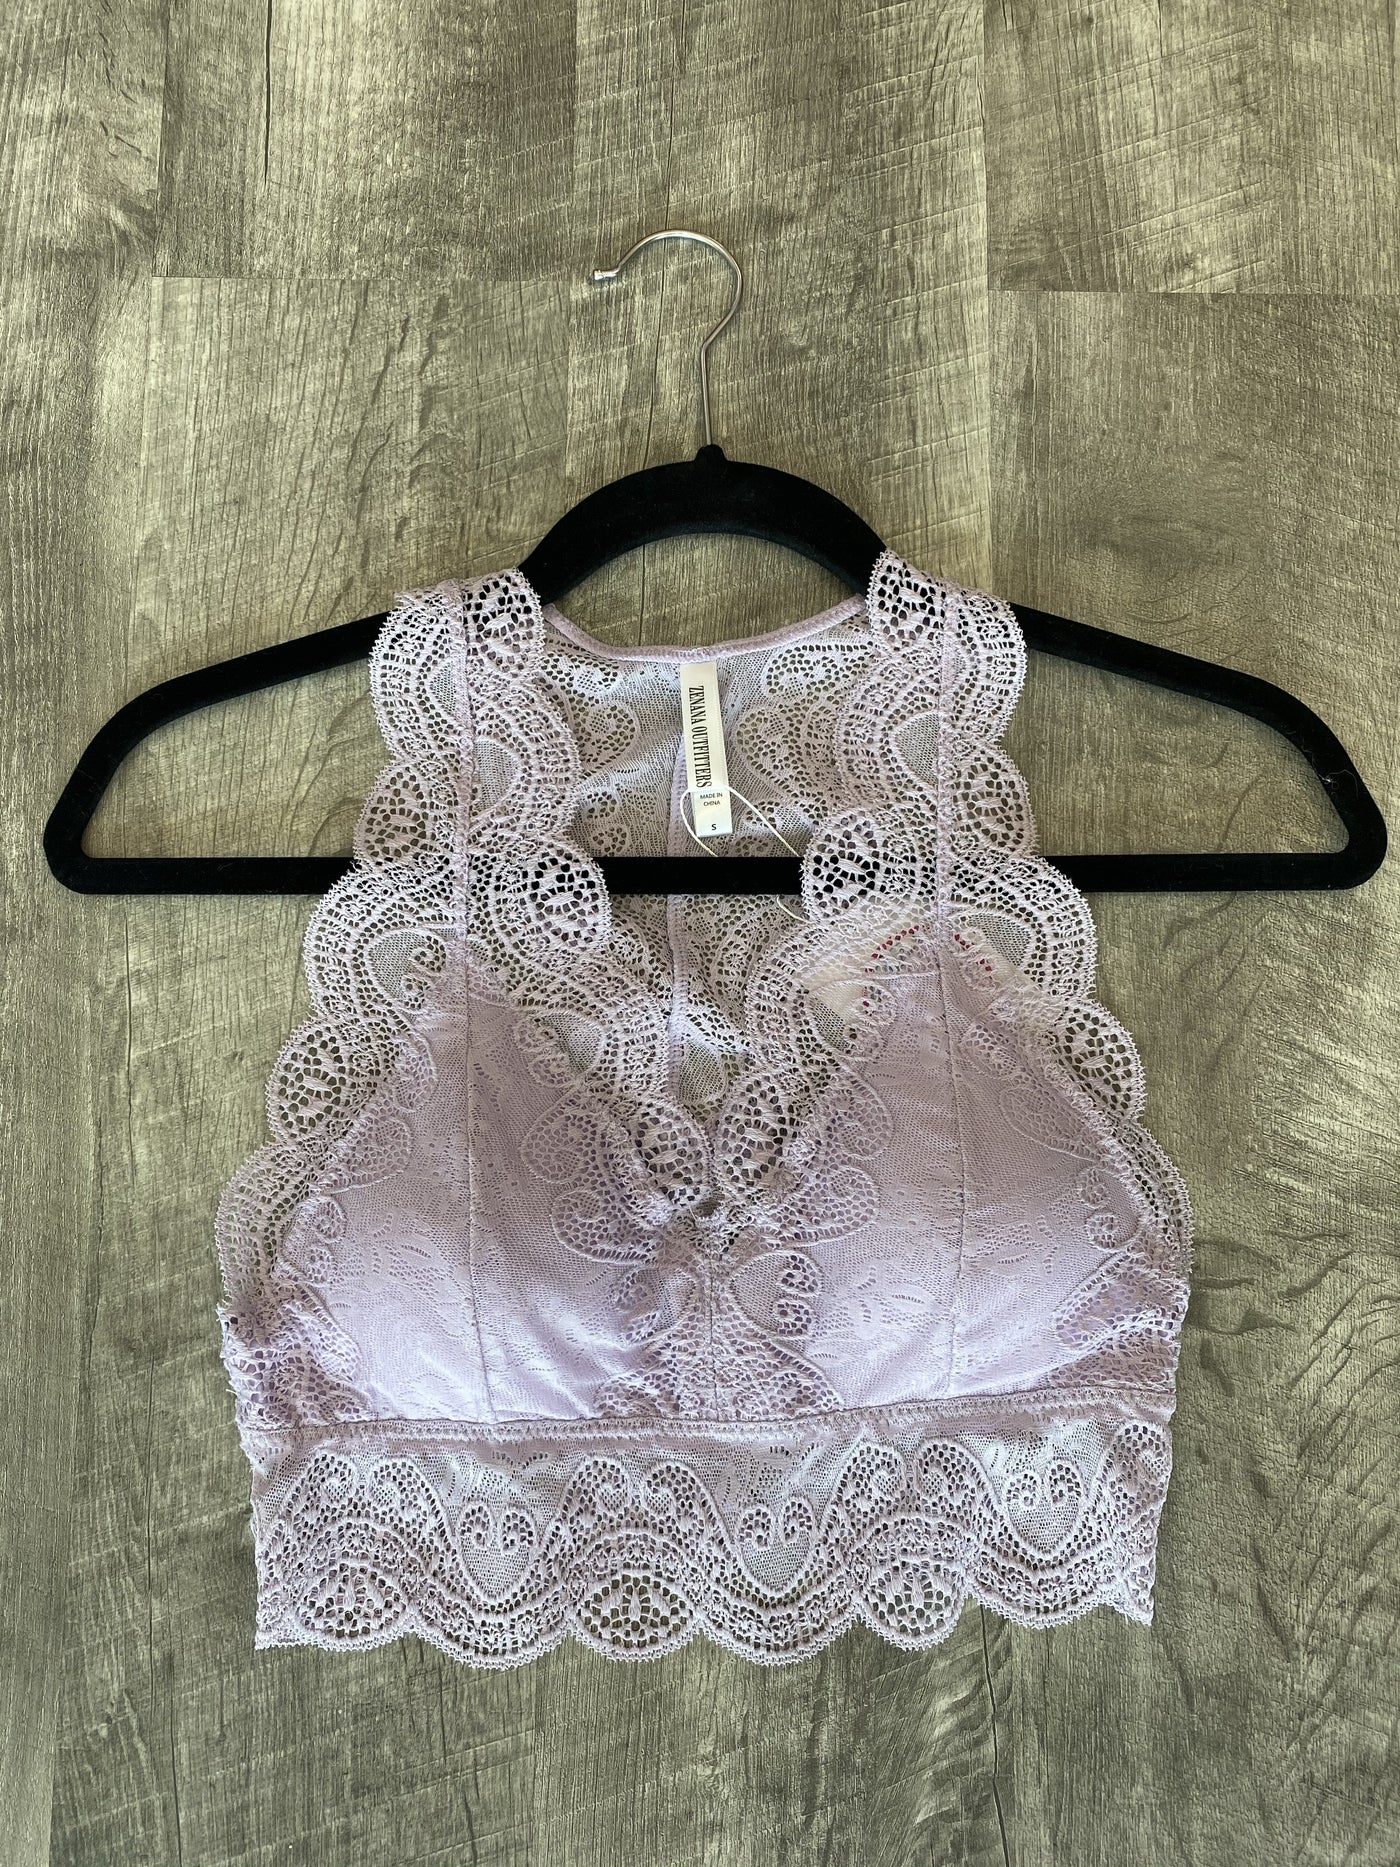 Lacy Bralette In Dusty Lavender - The Teal Turtle Clothing Company